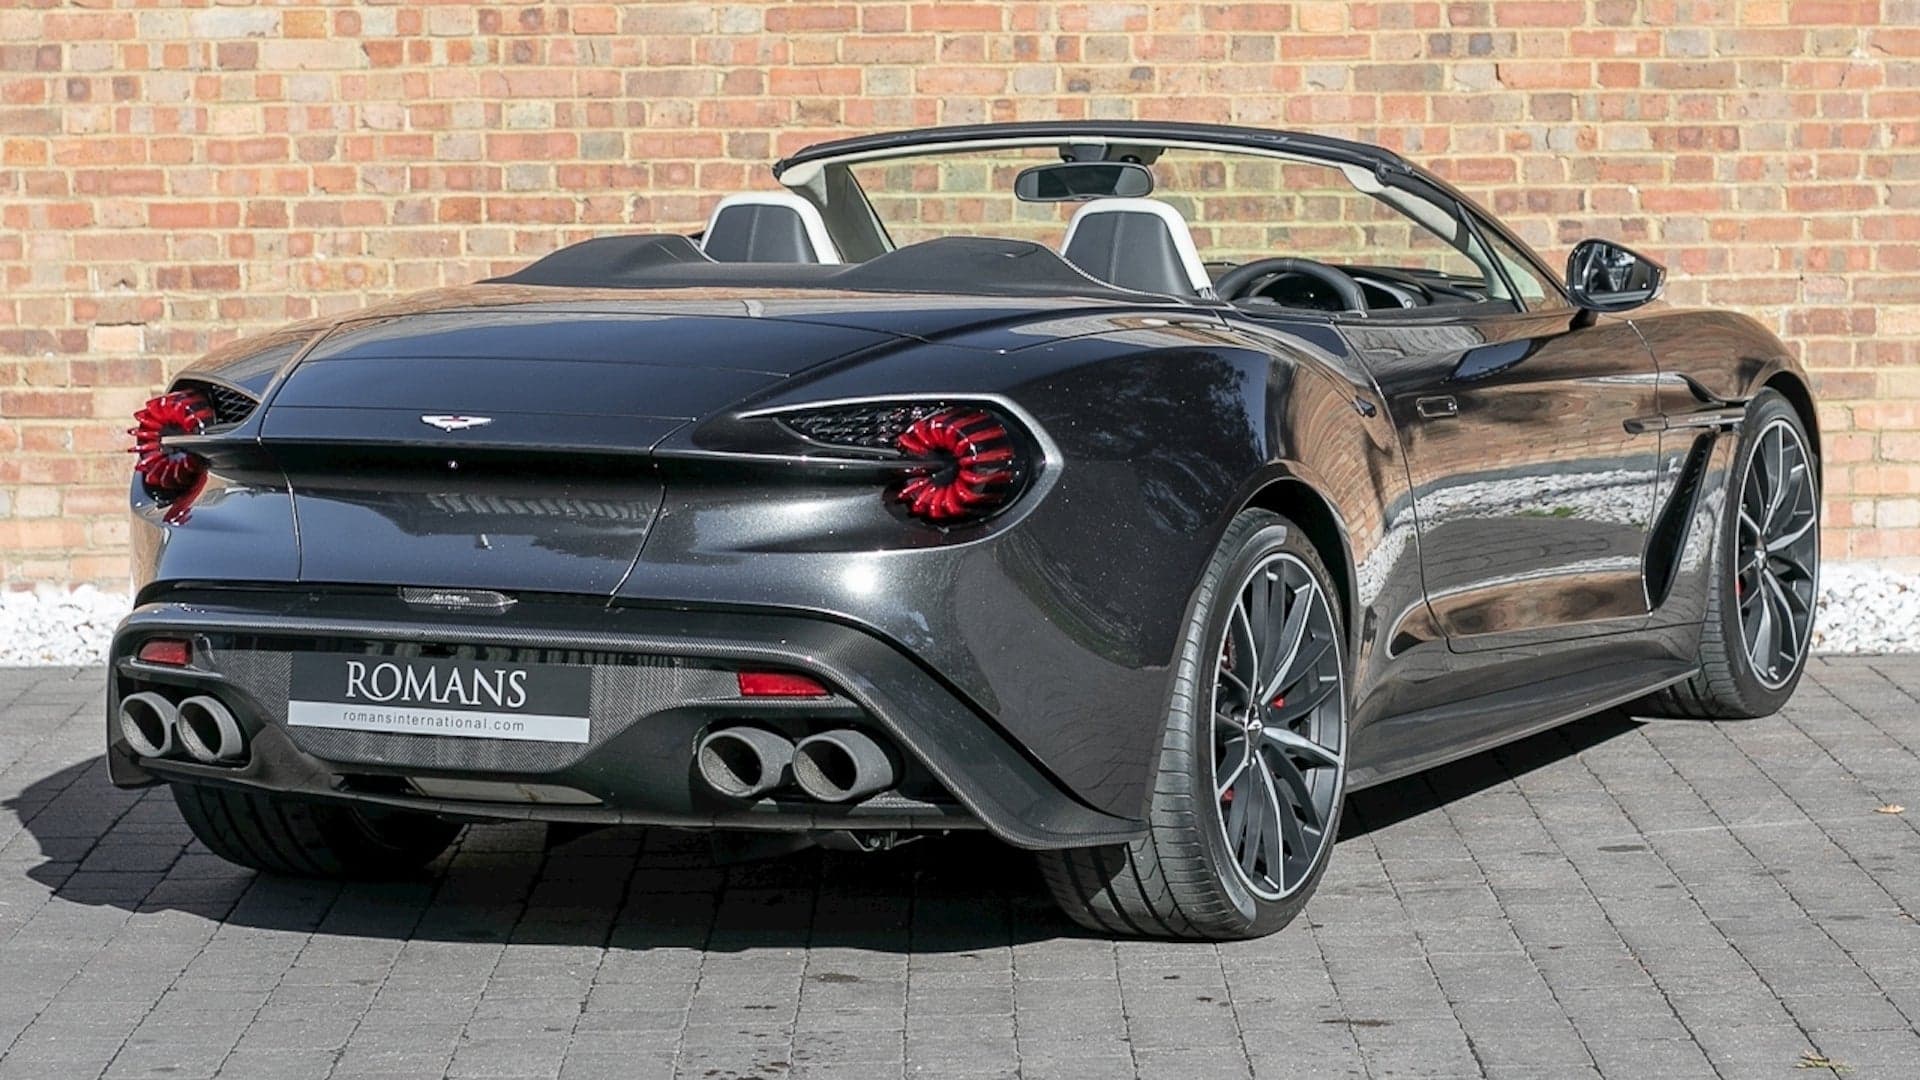 Aston Martin Vanquish Zagato Volante Listed for Sale With Eye-Watering Price Tag